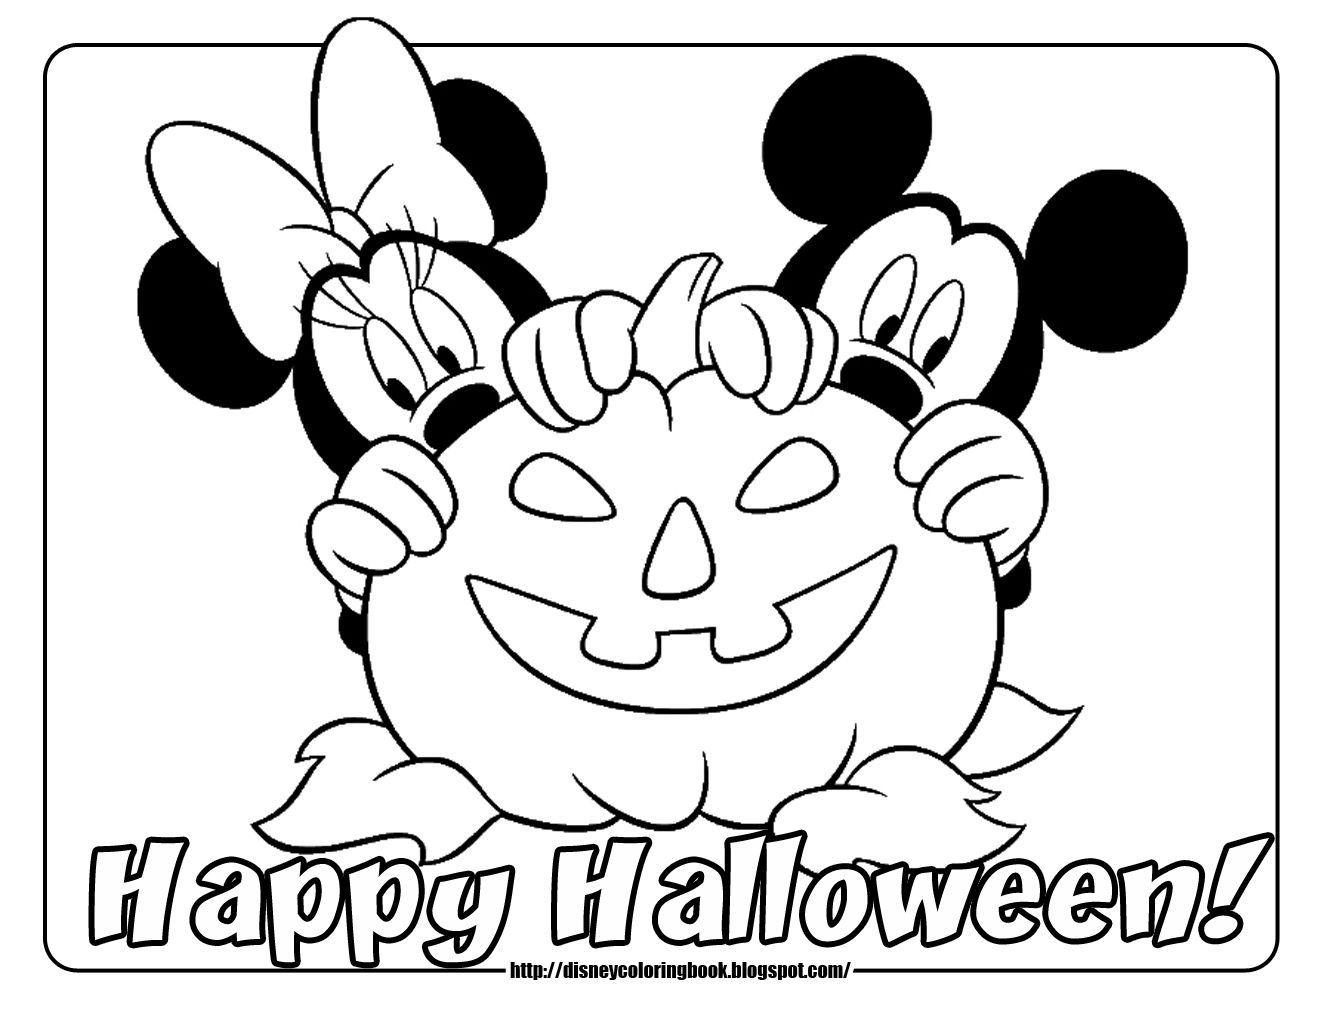 Mickey Mouse Farm Coloring Pages Halloween Coloring Pages Mickey Free Halloween Coloring Pages Mickey Mouse Coloring Pages Halloween Coloring Pages Printable Coloring Home